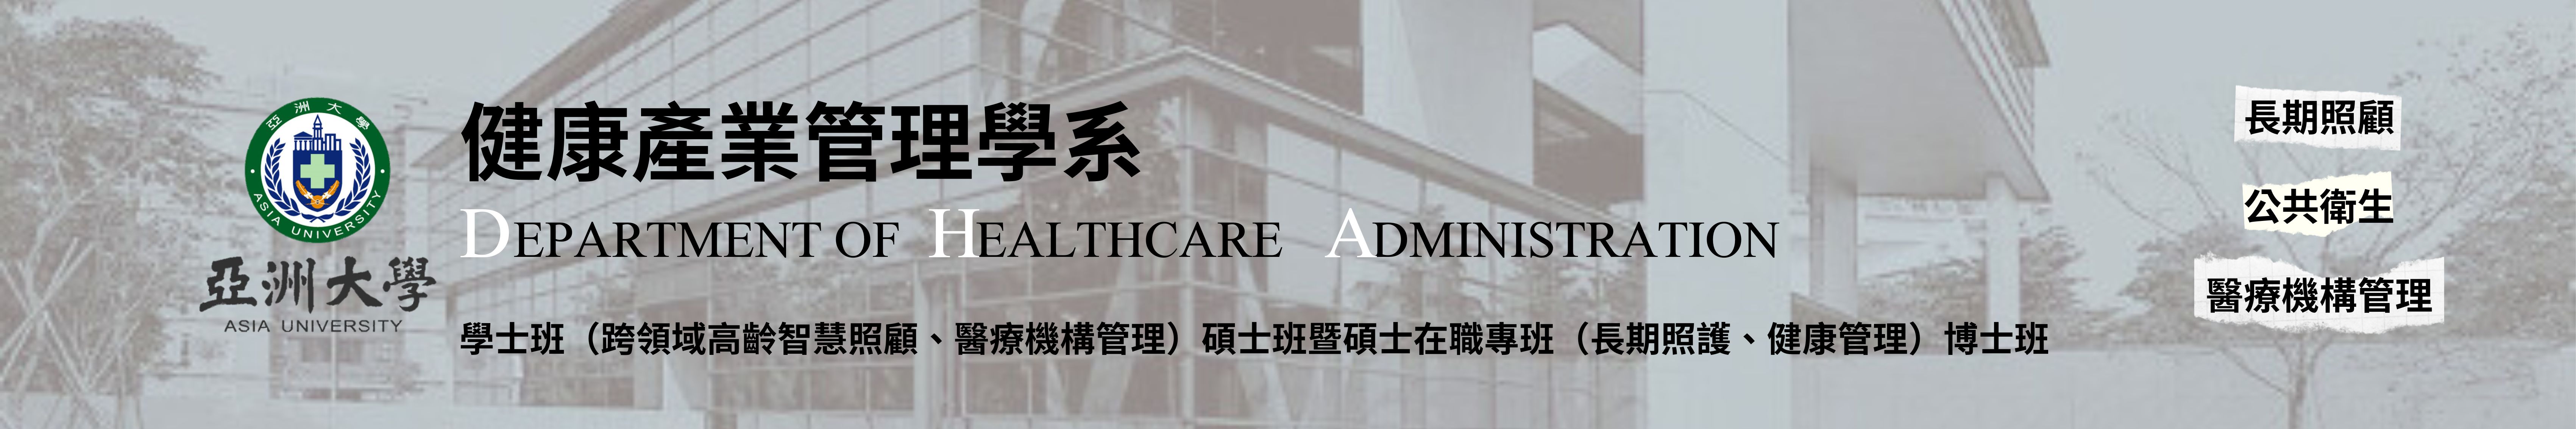 Department of Healthcare Administration, Asia University Logo